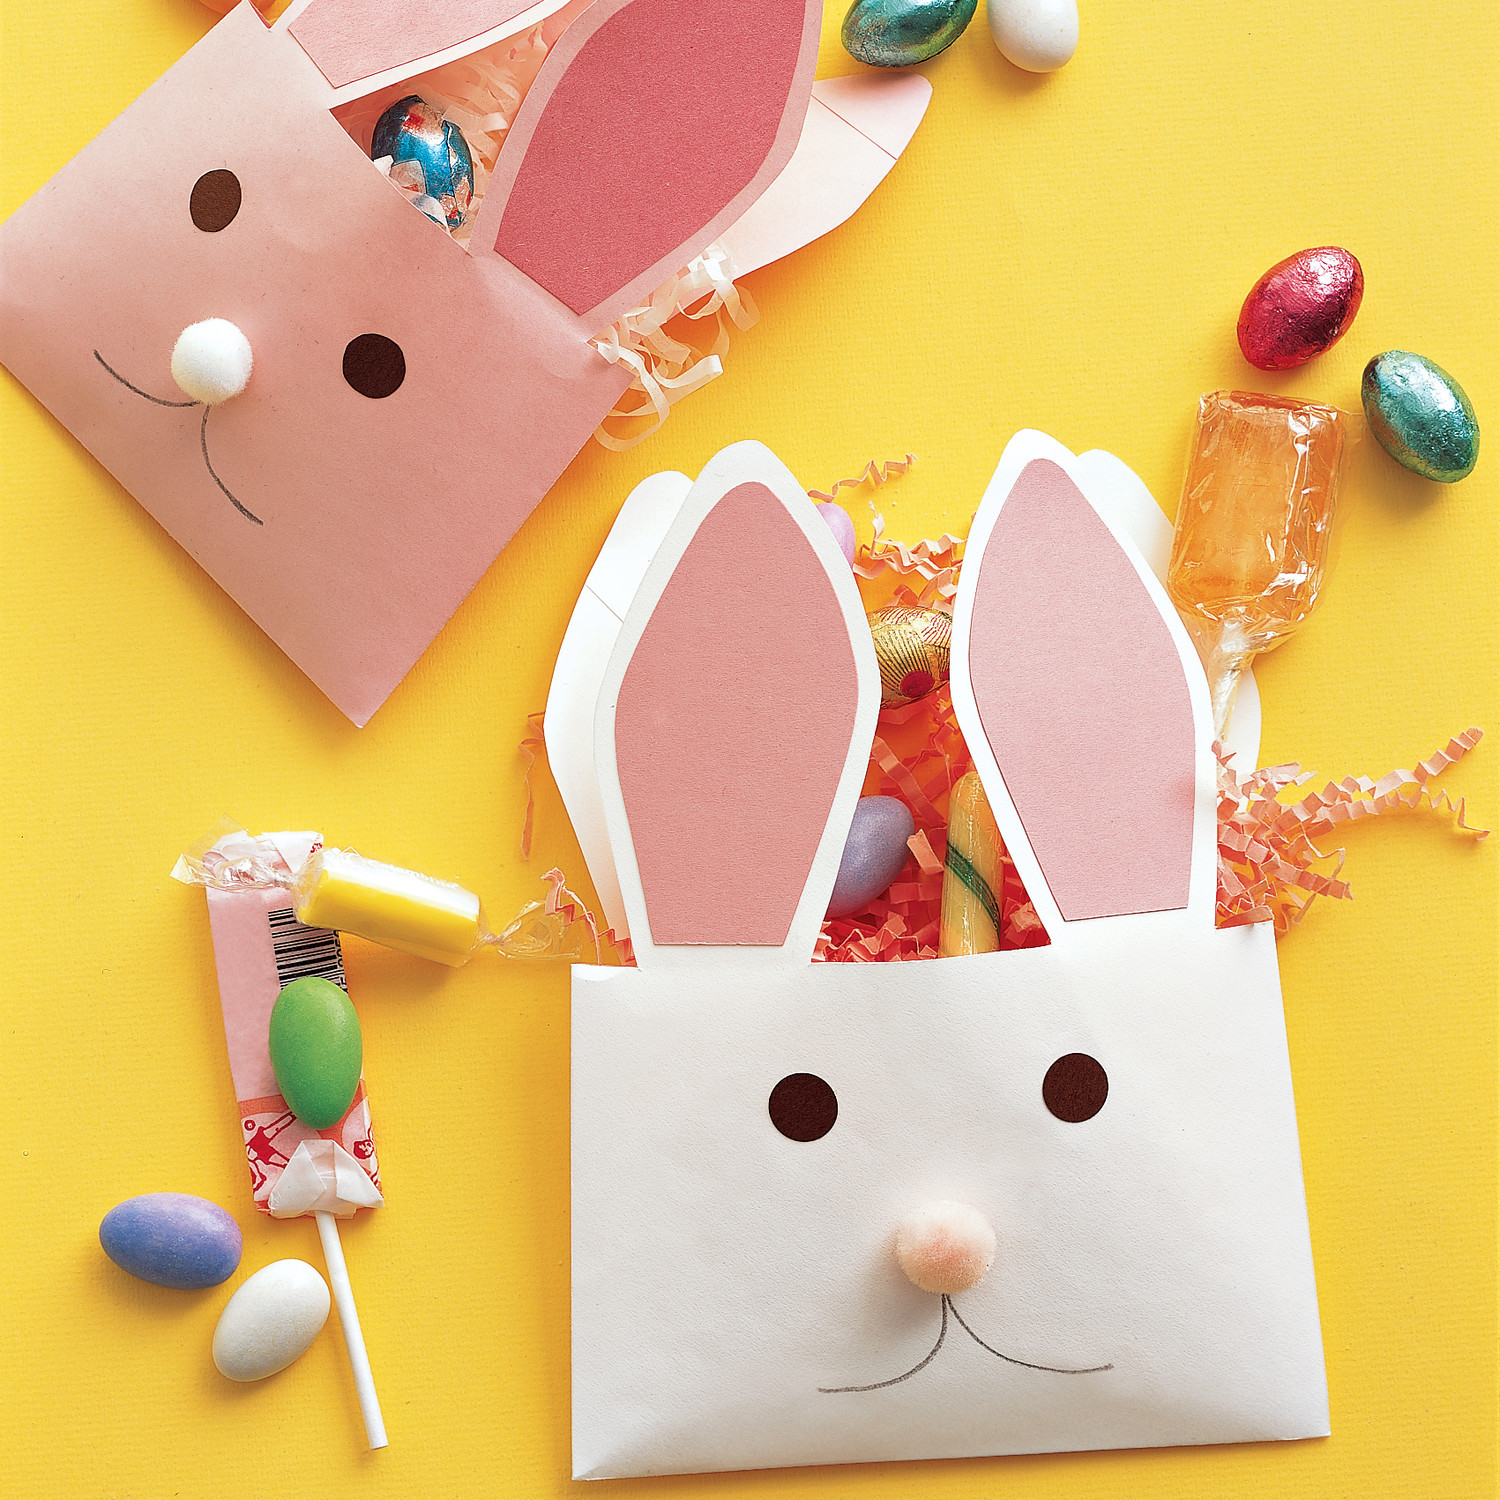 Arts &amp; Crafts For Kids
 The Best Easter Crafts and Activities for Kids